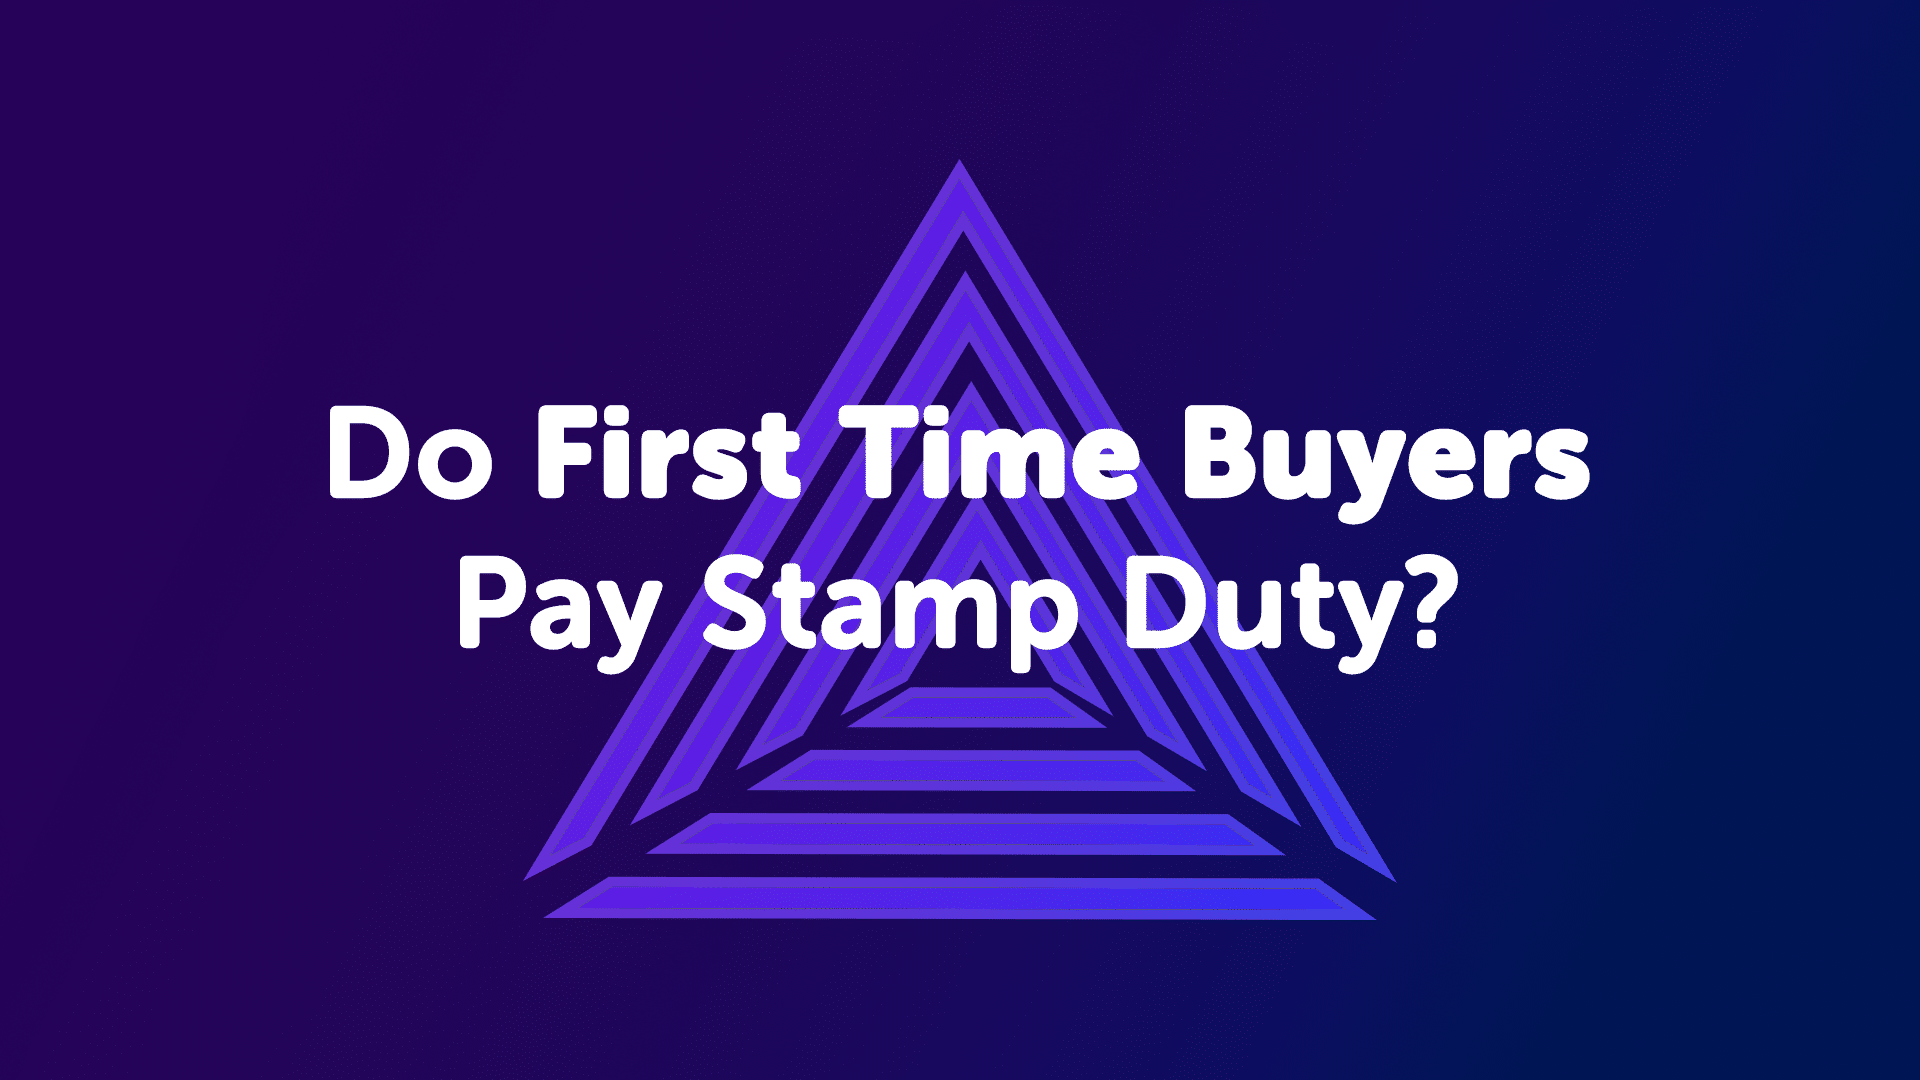 Do First Time Buyers Pay Stamp Duty